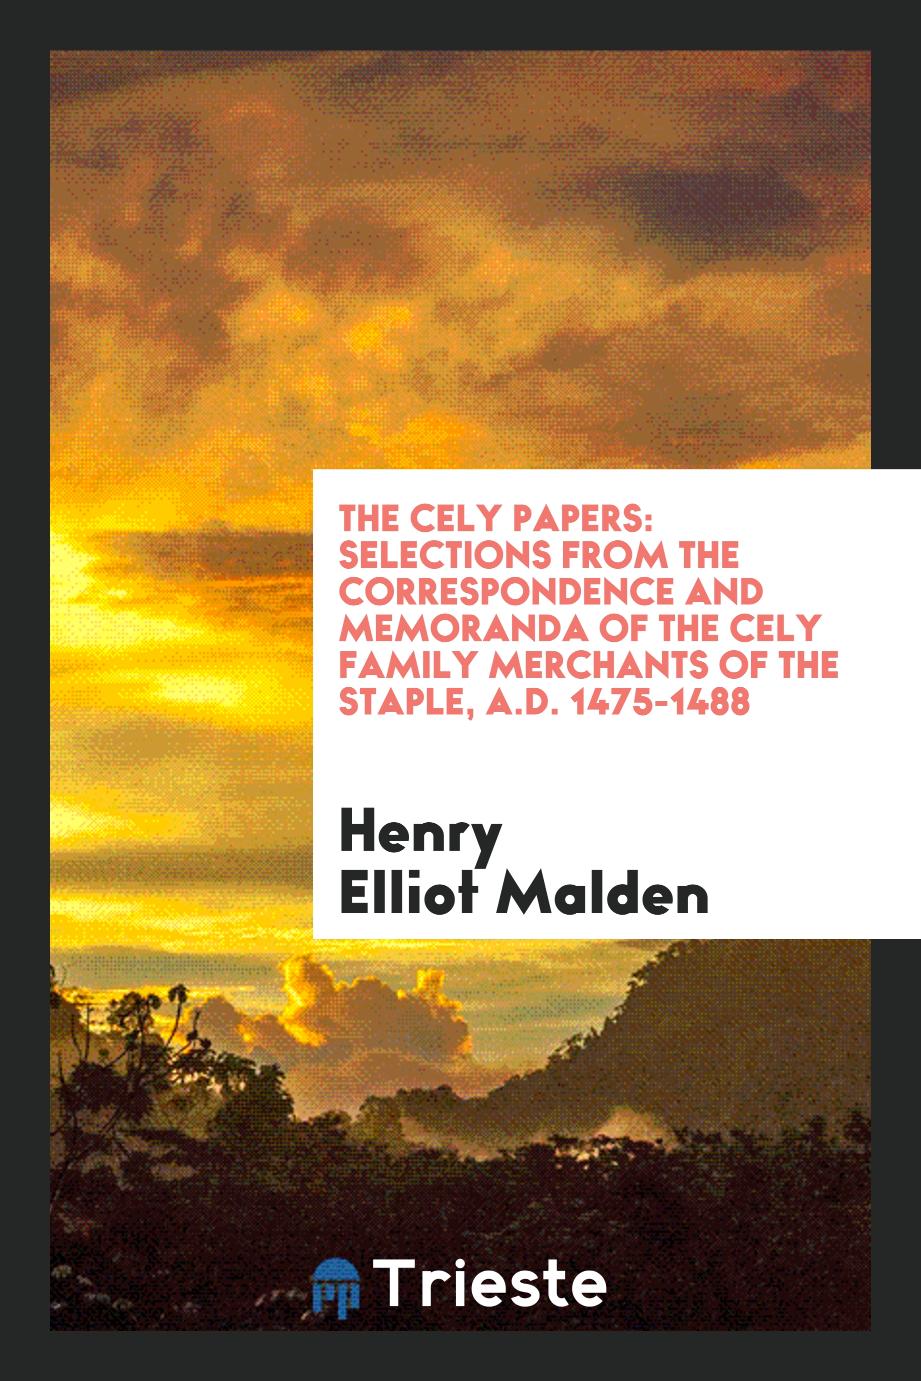 Henry Elliot Malden - The Cely Papers: Selections from the Correspondence and Memoranda of the Cely Family Merchants of the Staple, A.D. 1475-1488